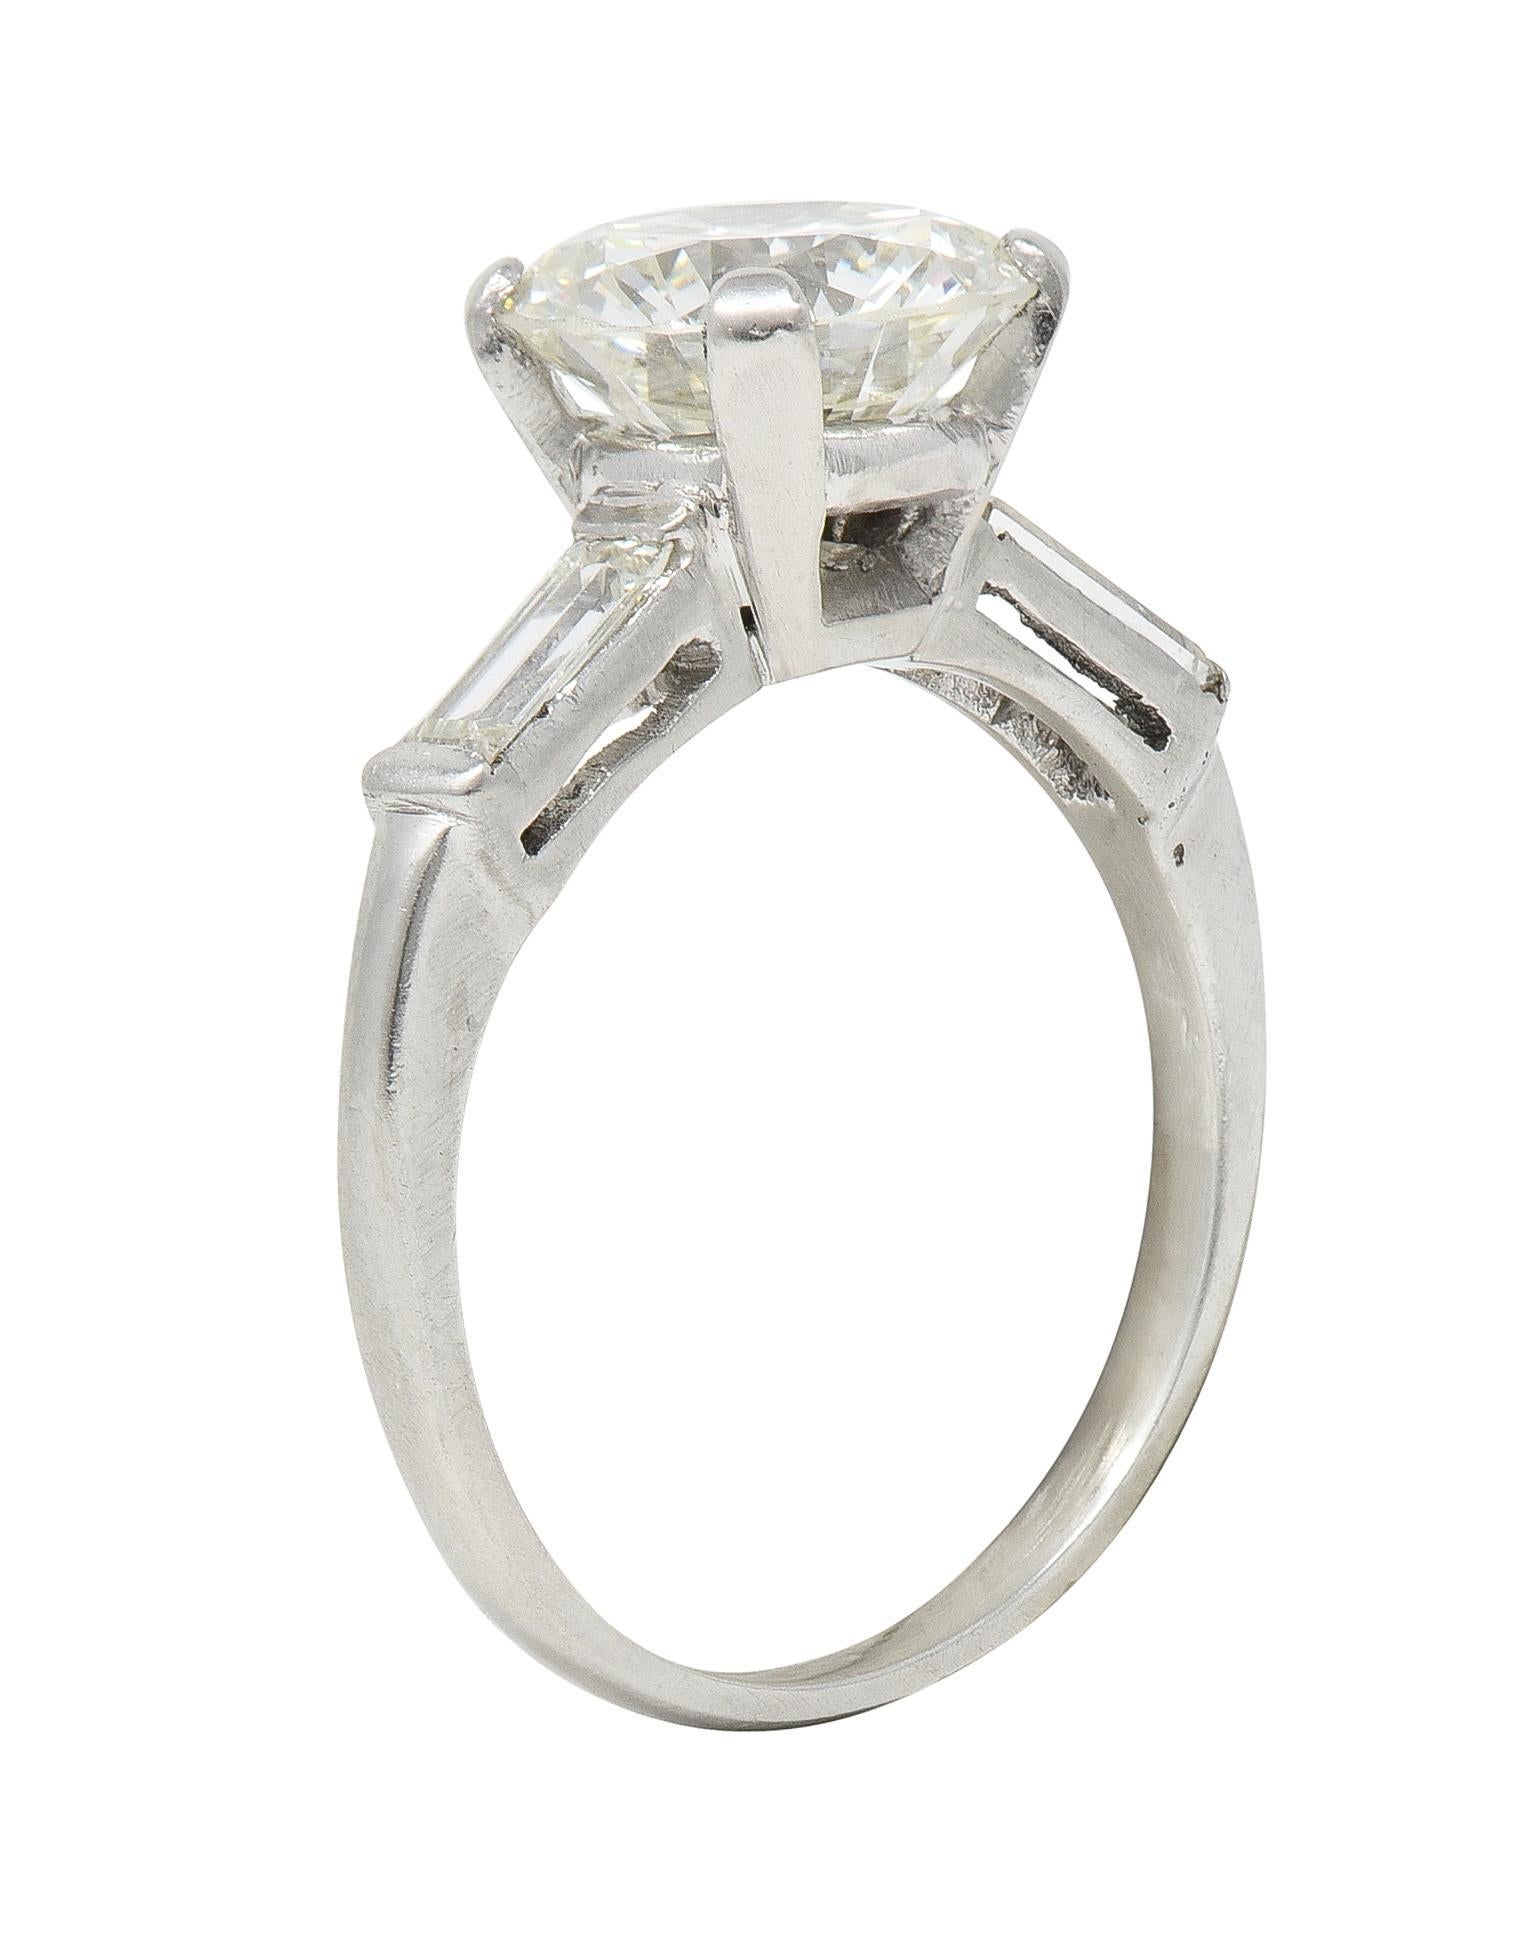 Centering a transitional cut diamond weighing 2.38 carats - J color with VS2 clarity
Prong set in basket and flanked cathedral shoulders 
Bar set with baguette cut diamonds 
Weighing approximately 0.28 carat total 
Well matched to center 
Tested as